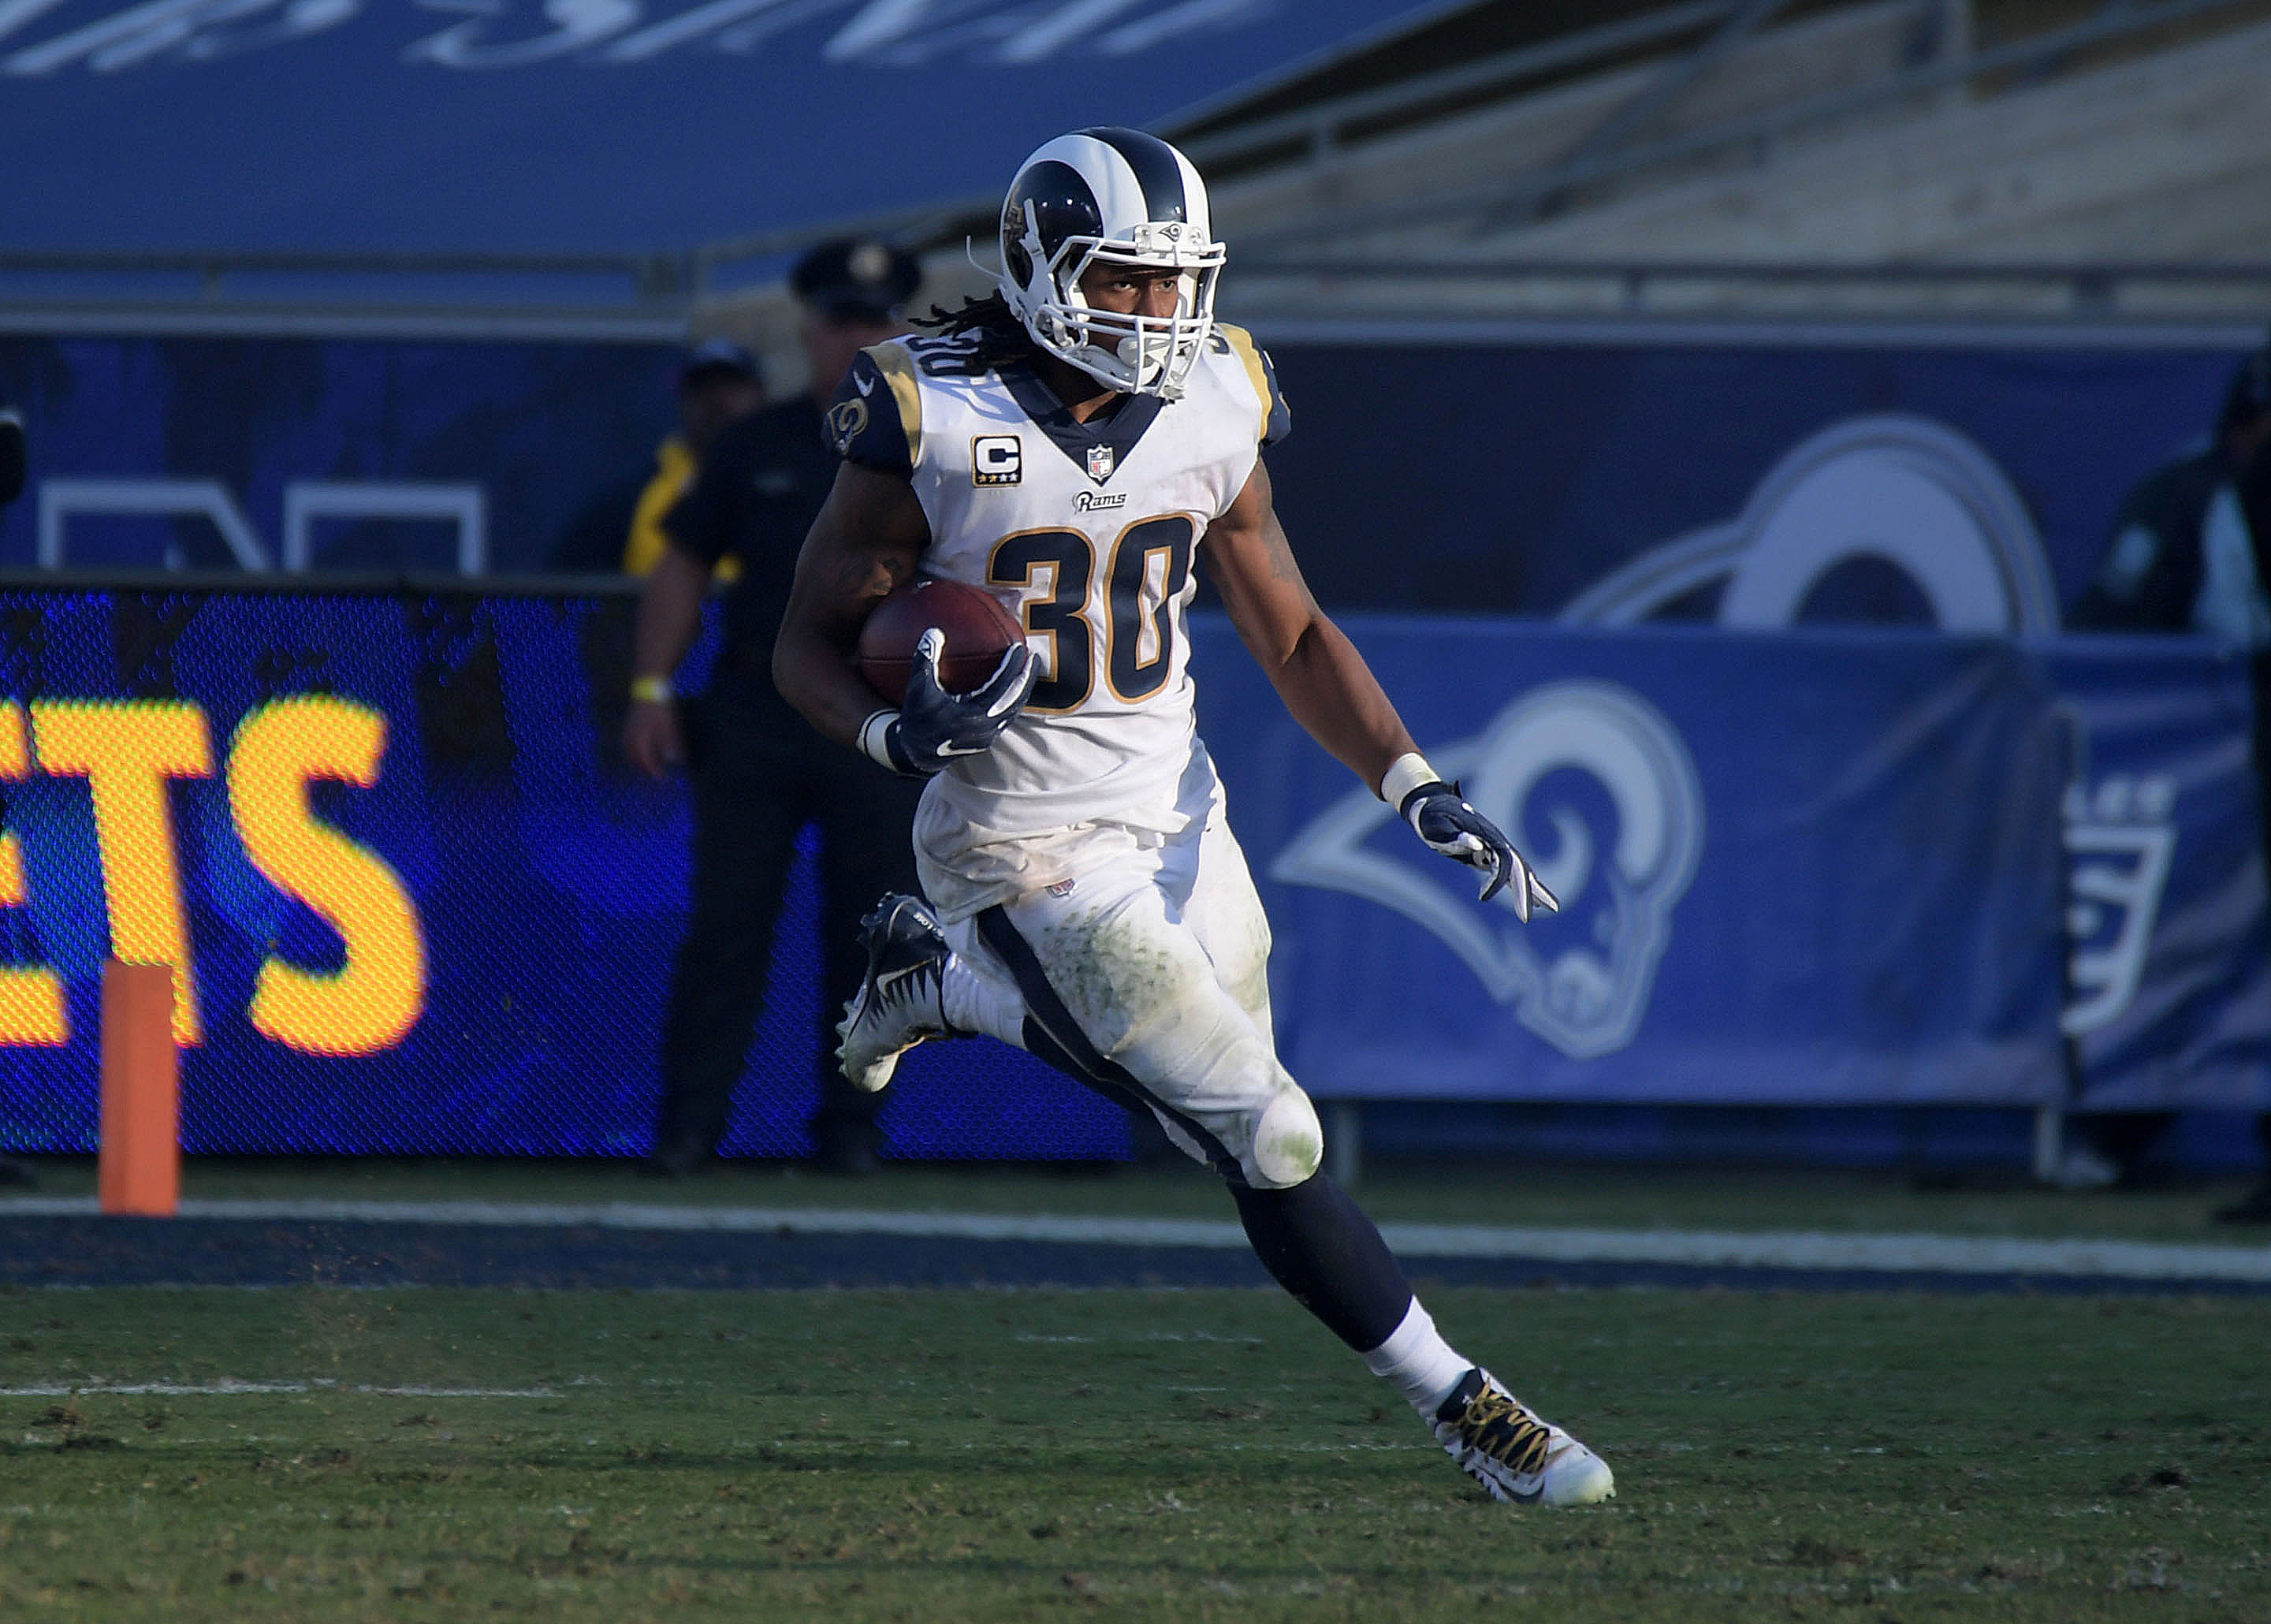 Los Angeles Rams RB Todd Gurley carries the ball against the New Orleans Saints in Week 12, Nov. 26, 2017.